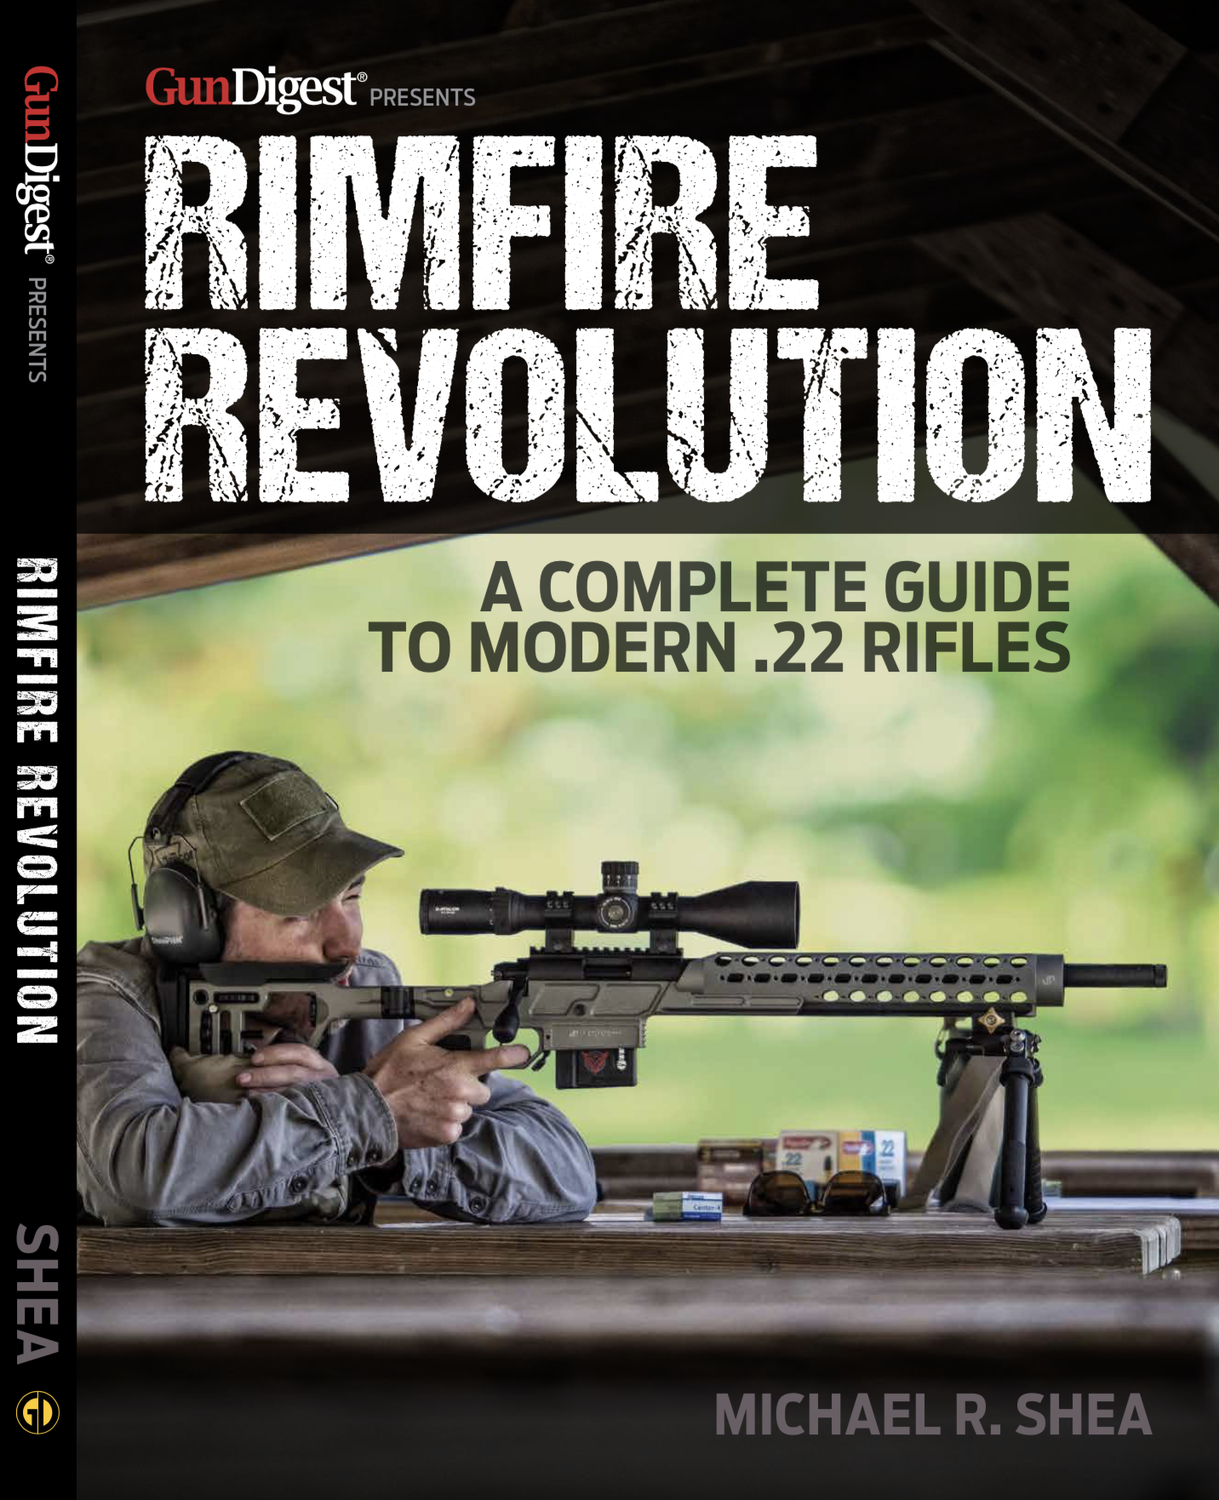 rimfire revolution the best rifle book ever written you should buy three